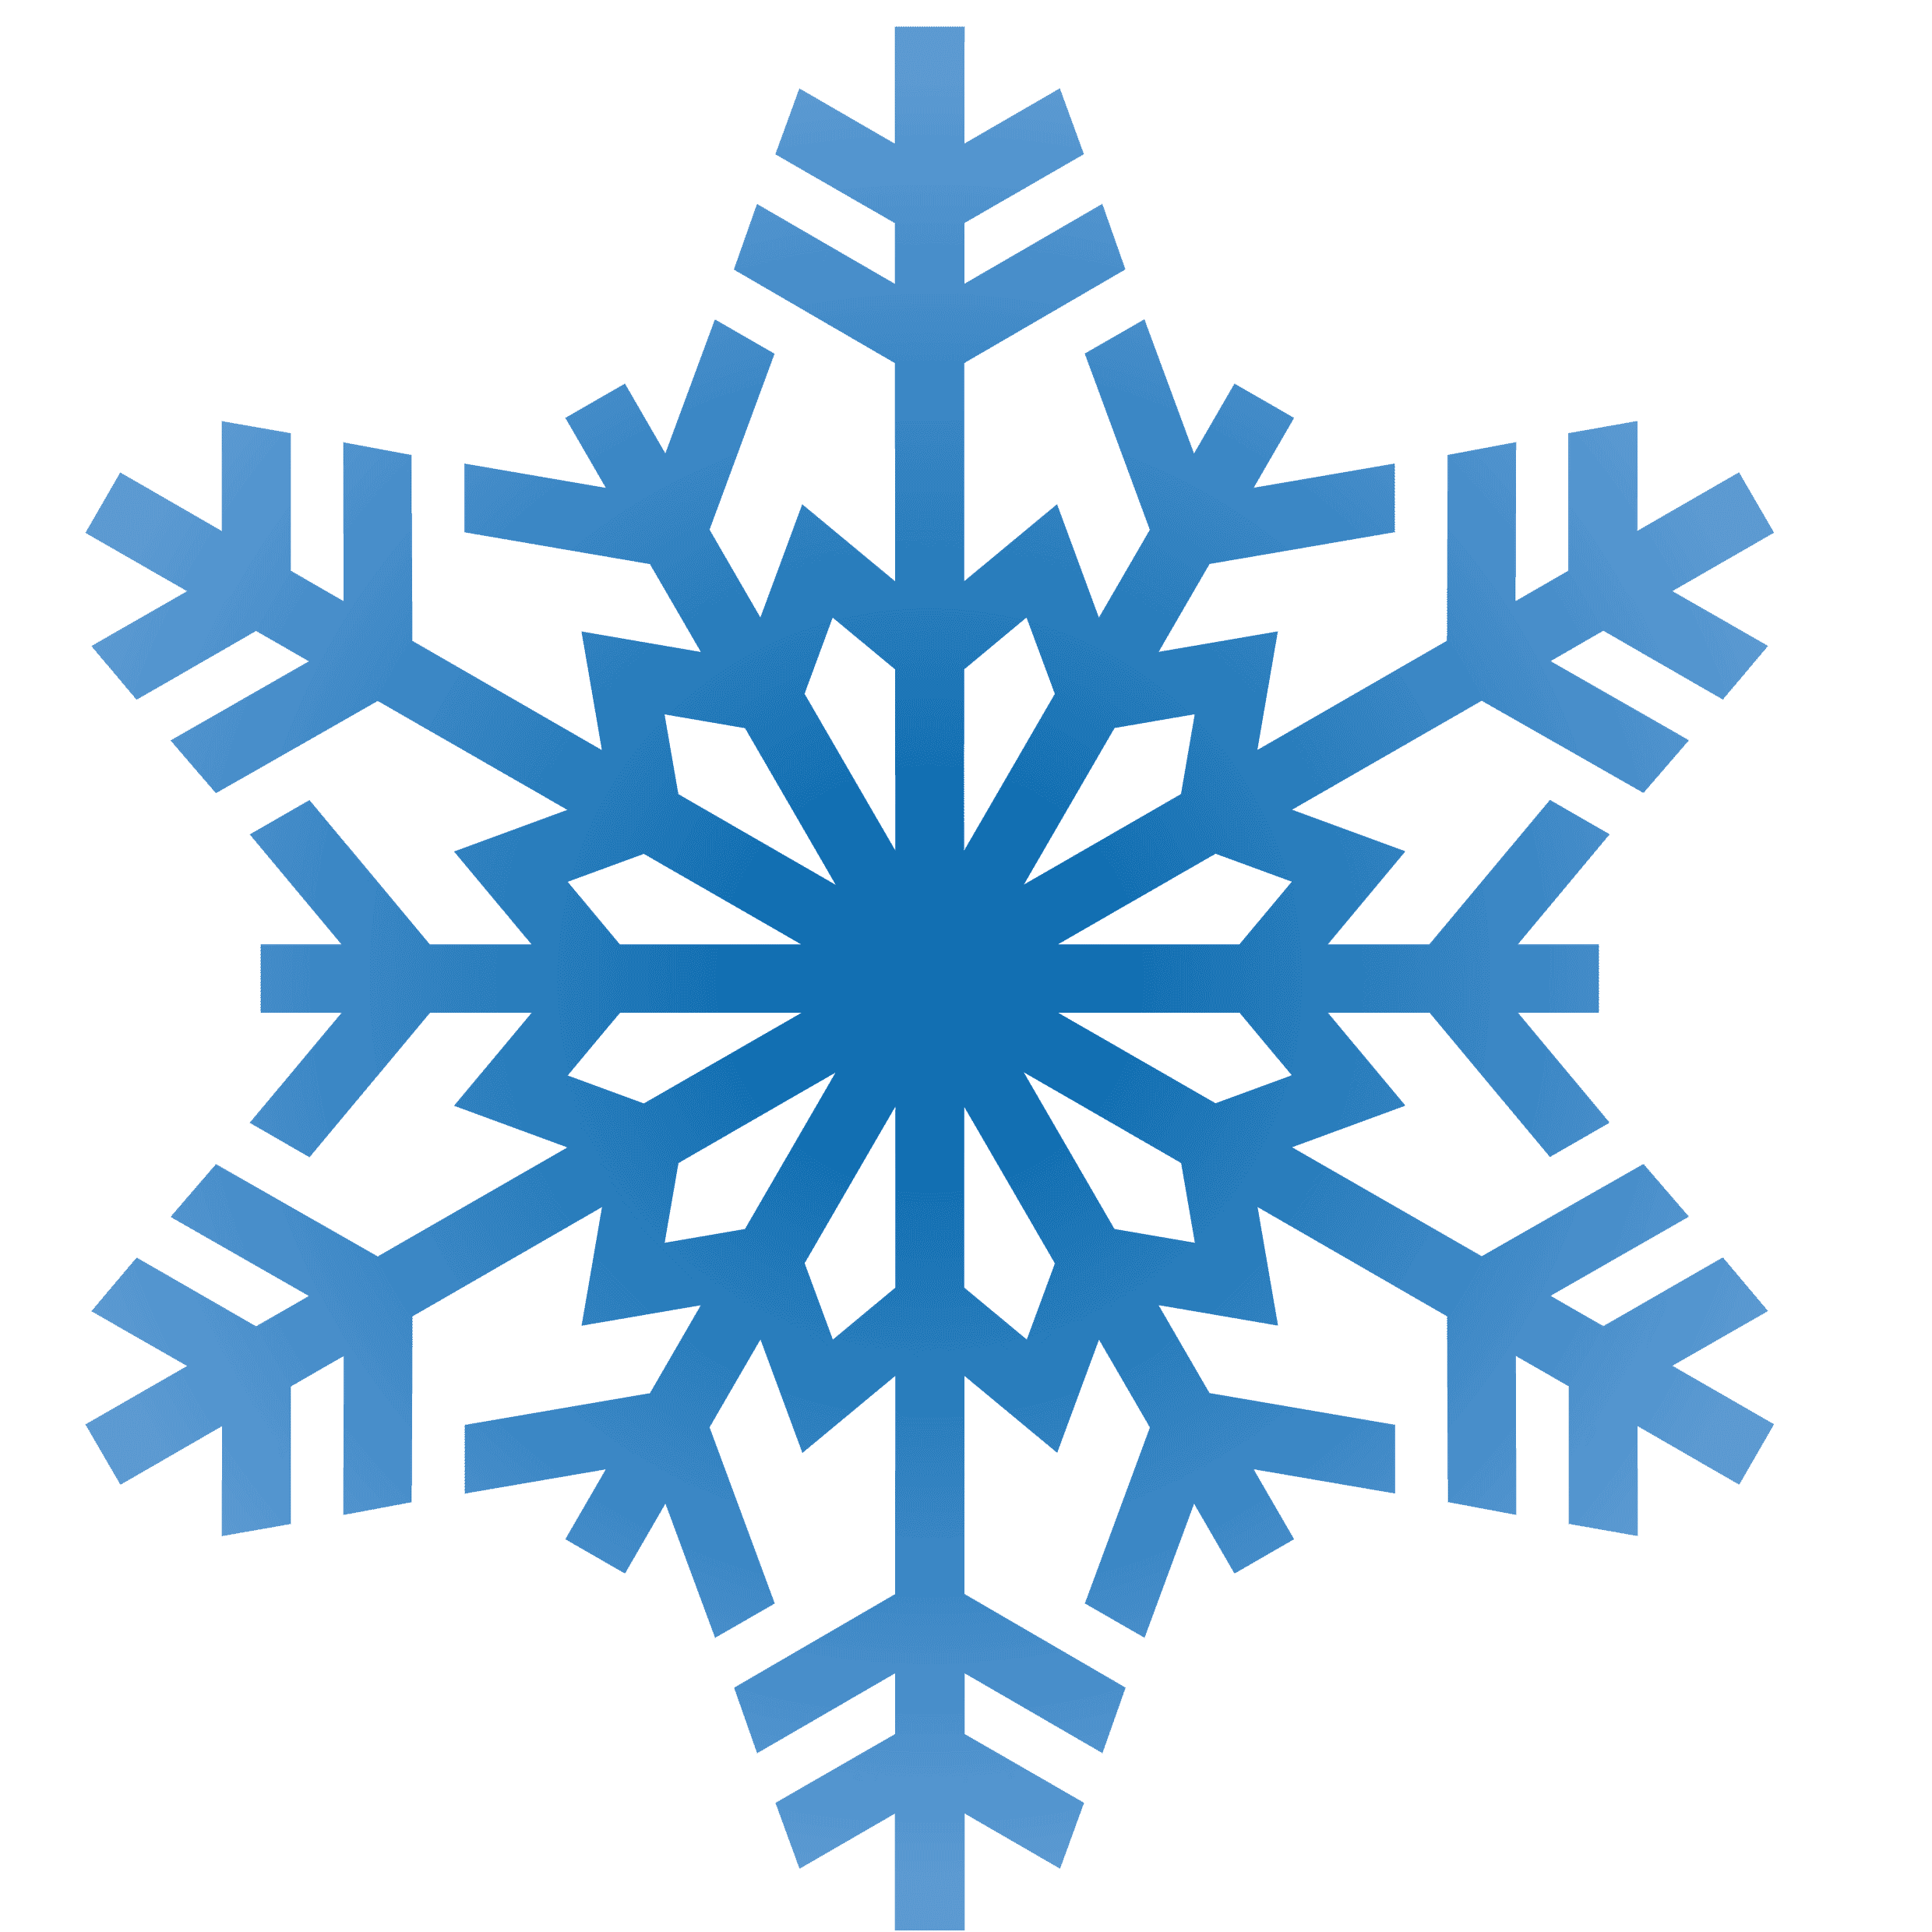 Frozen-Snowflake-PNG-Image.png